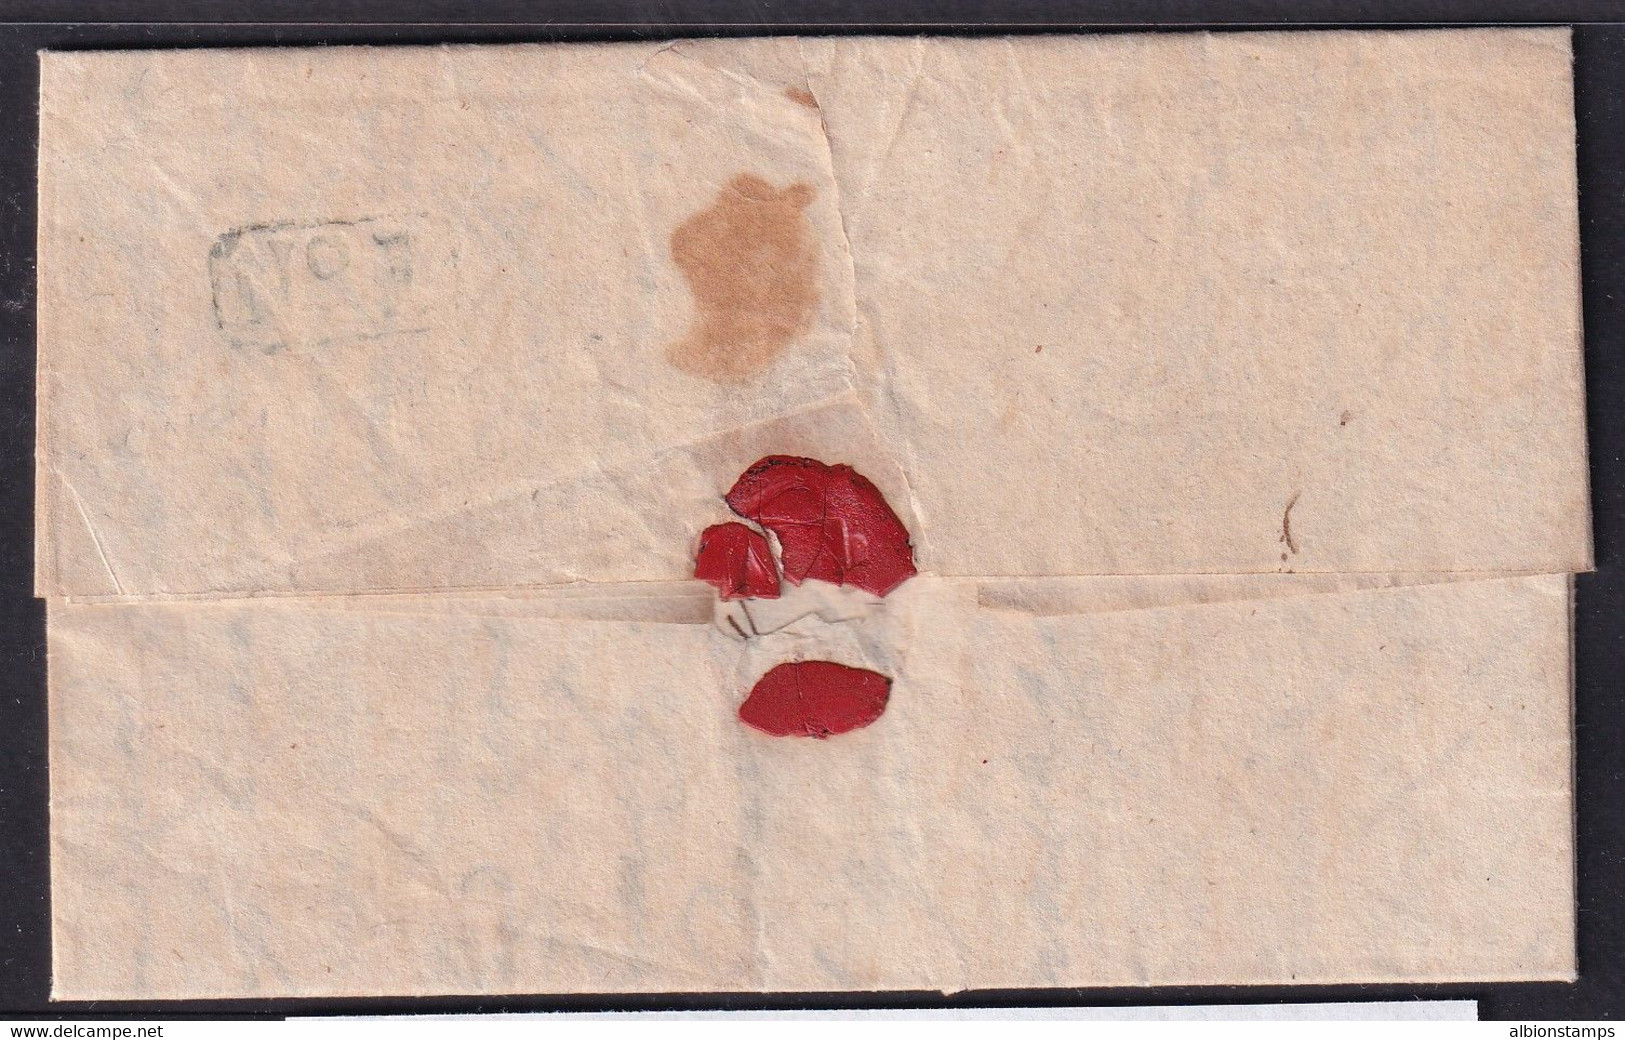 Bristol Penny Post 1816 Cumberland Place To Salop Folded Letter - ...-1840 Precursores